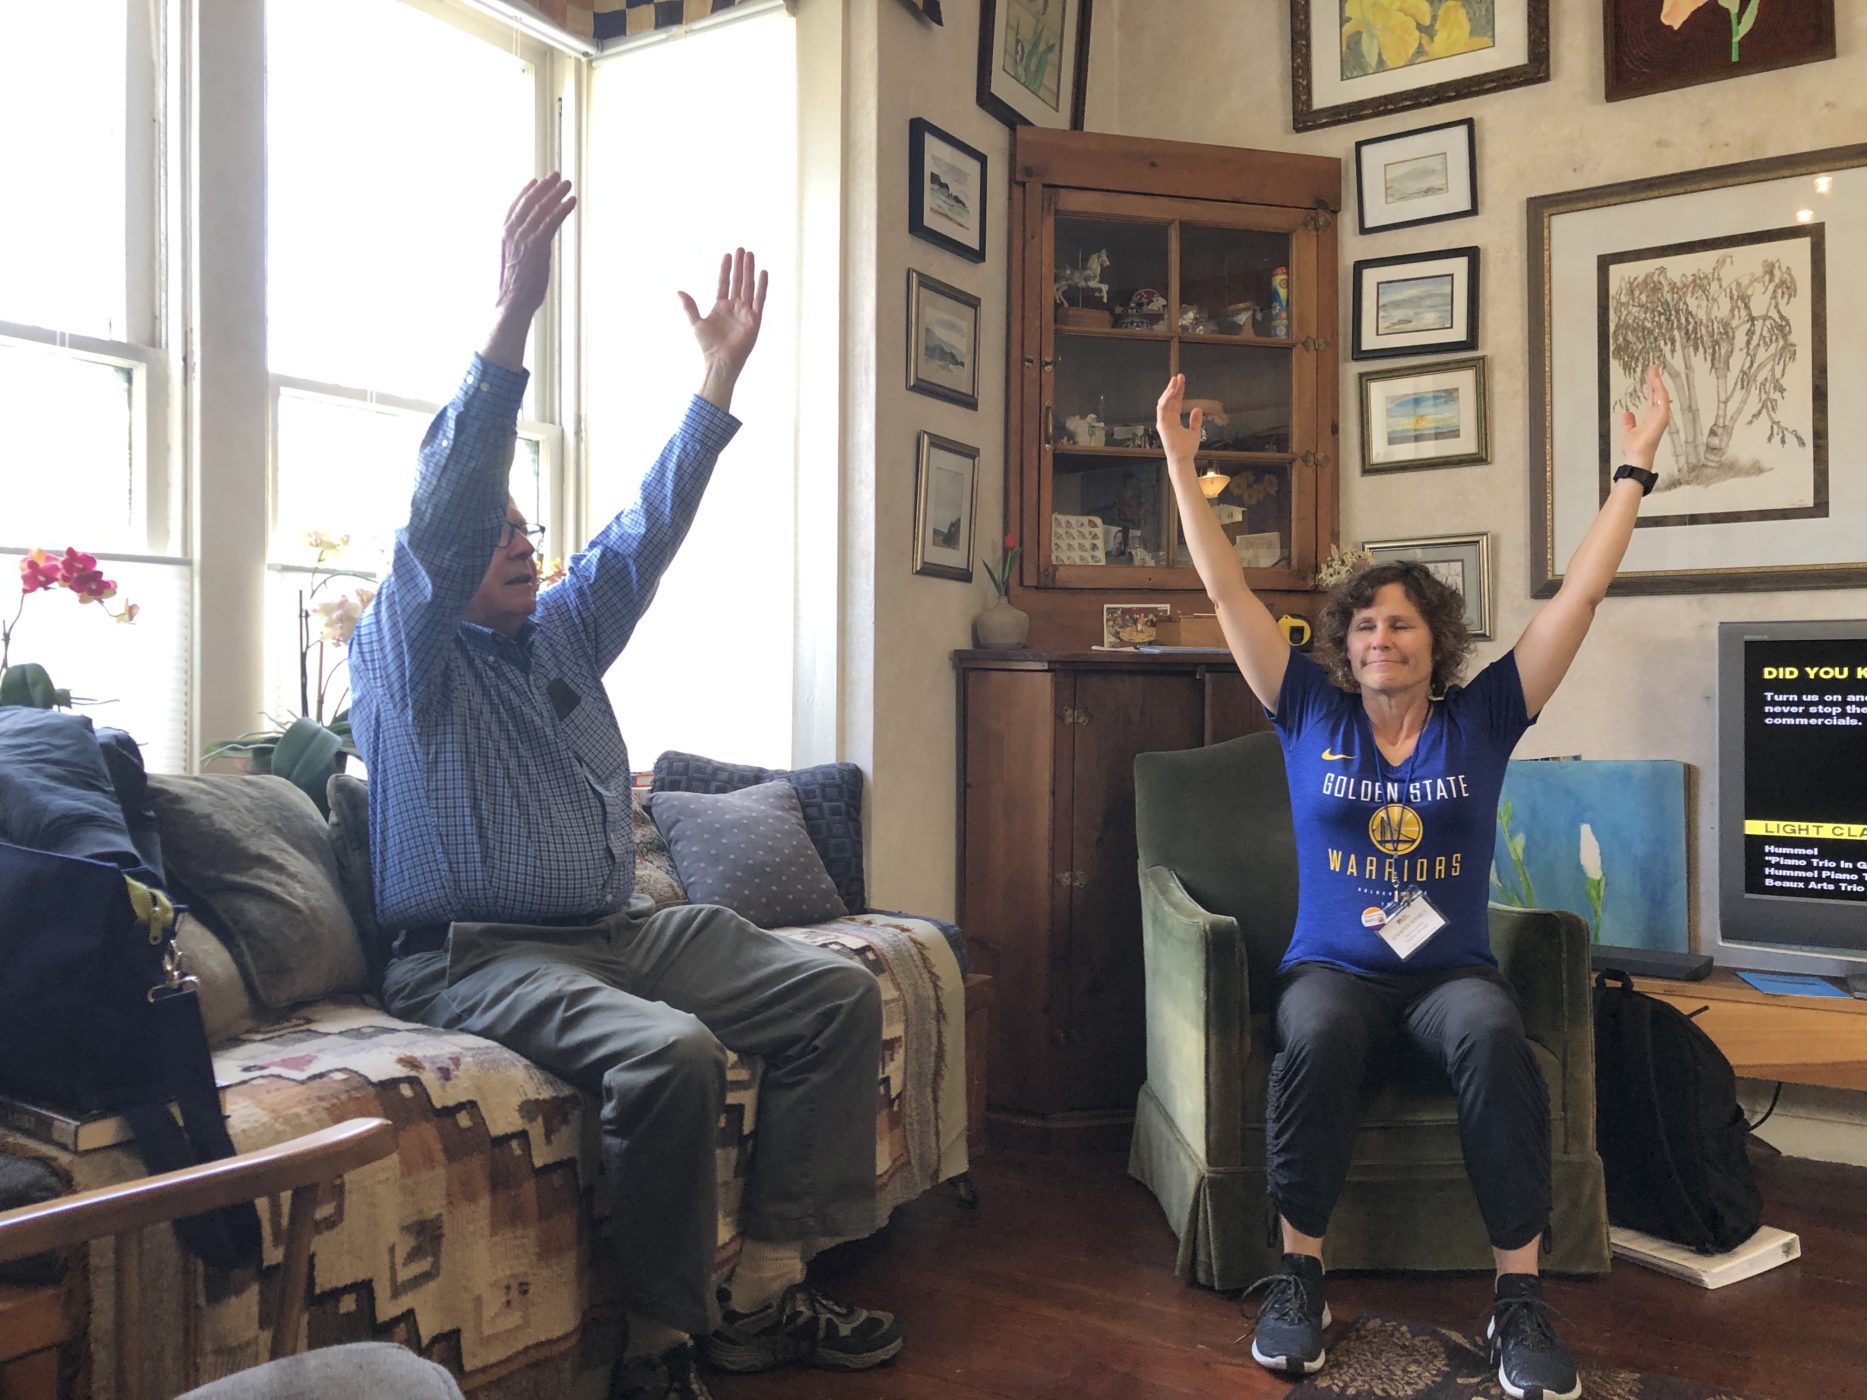 Two older adults sitting on couches in a living room, with their arms raised straight up in the air